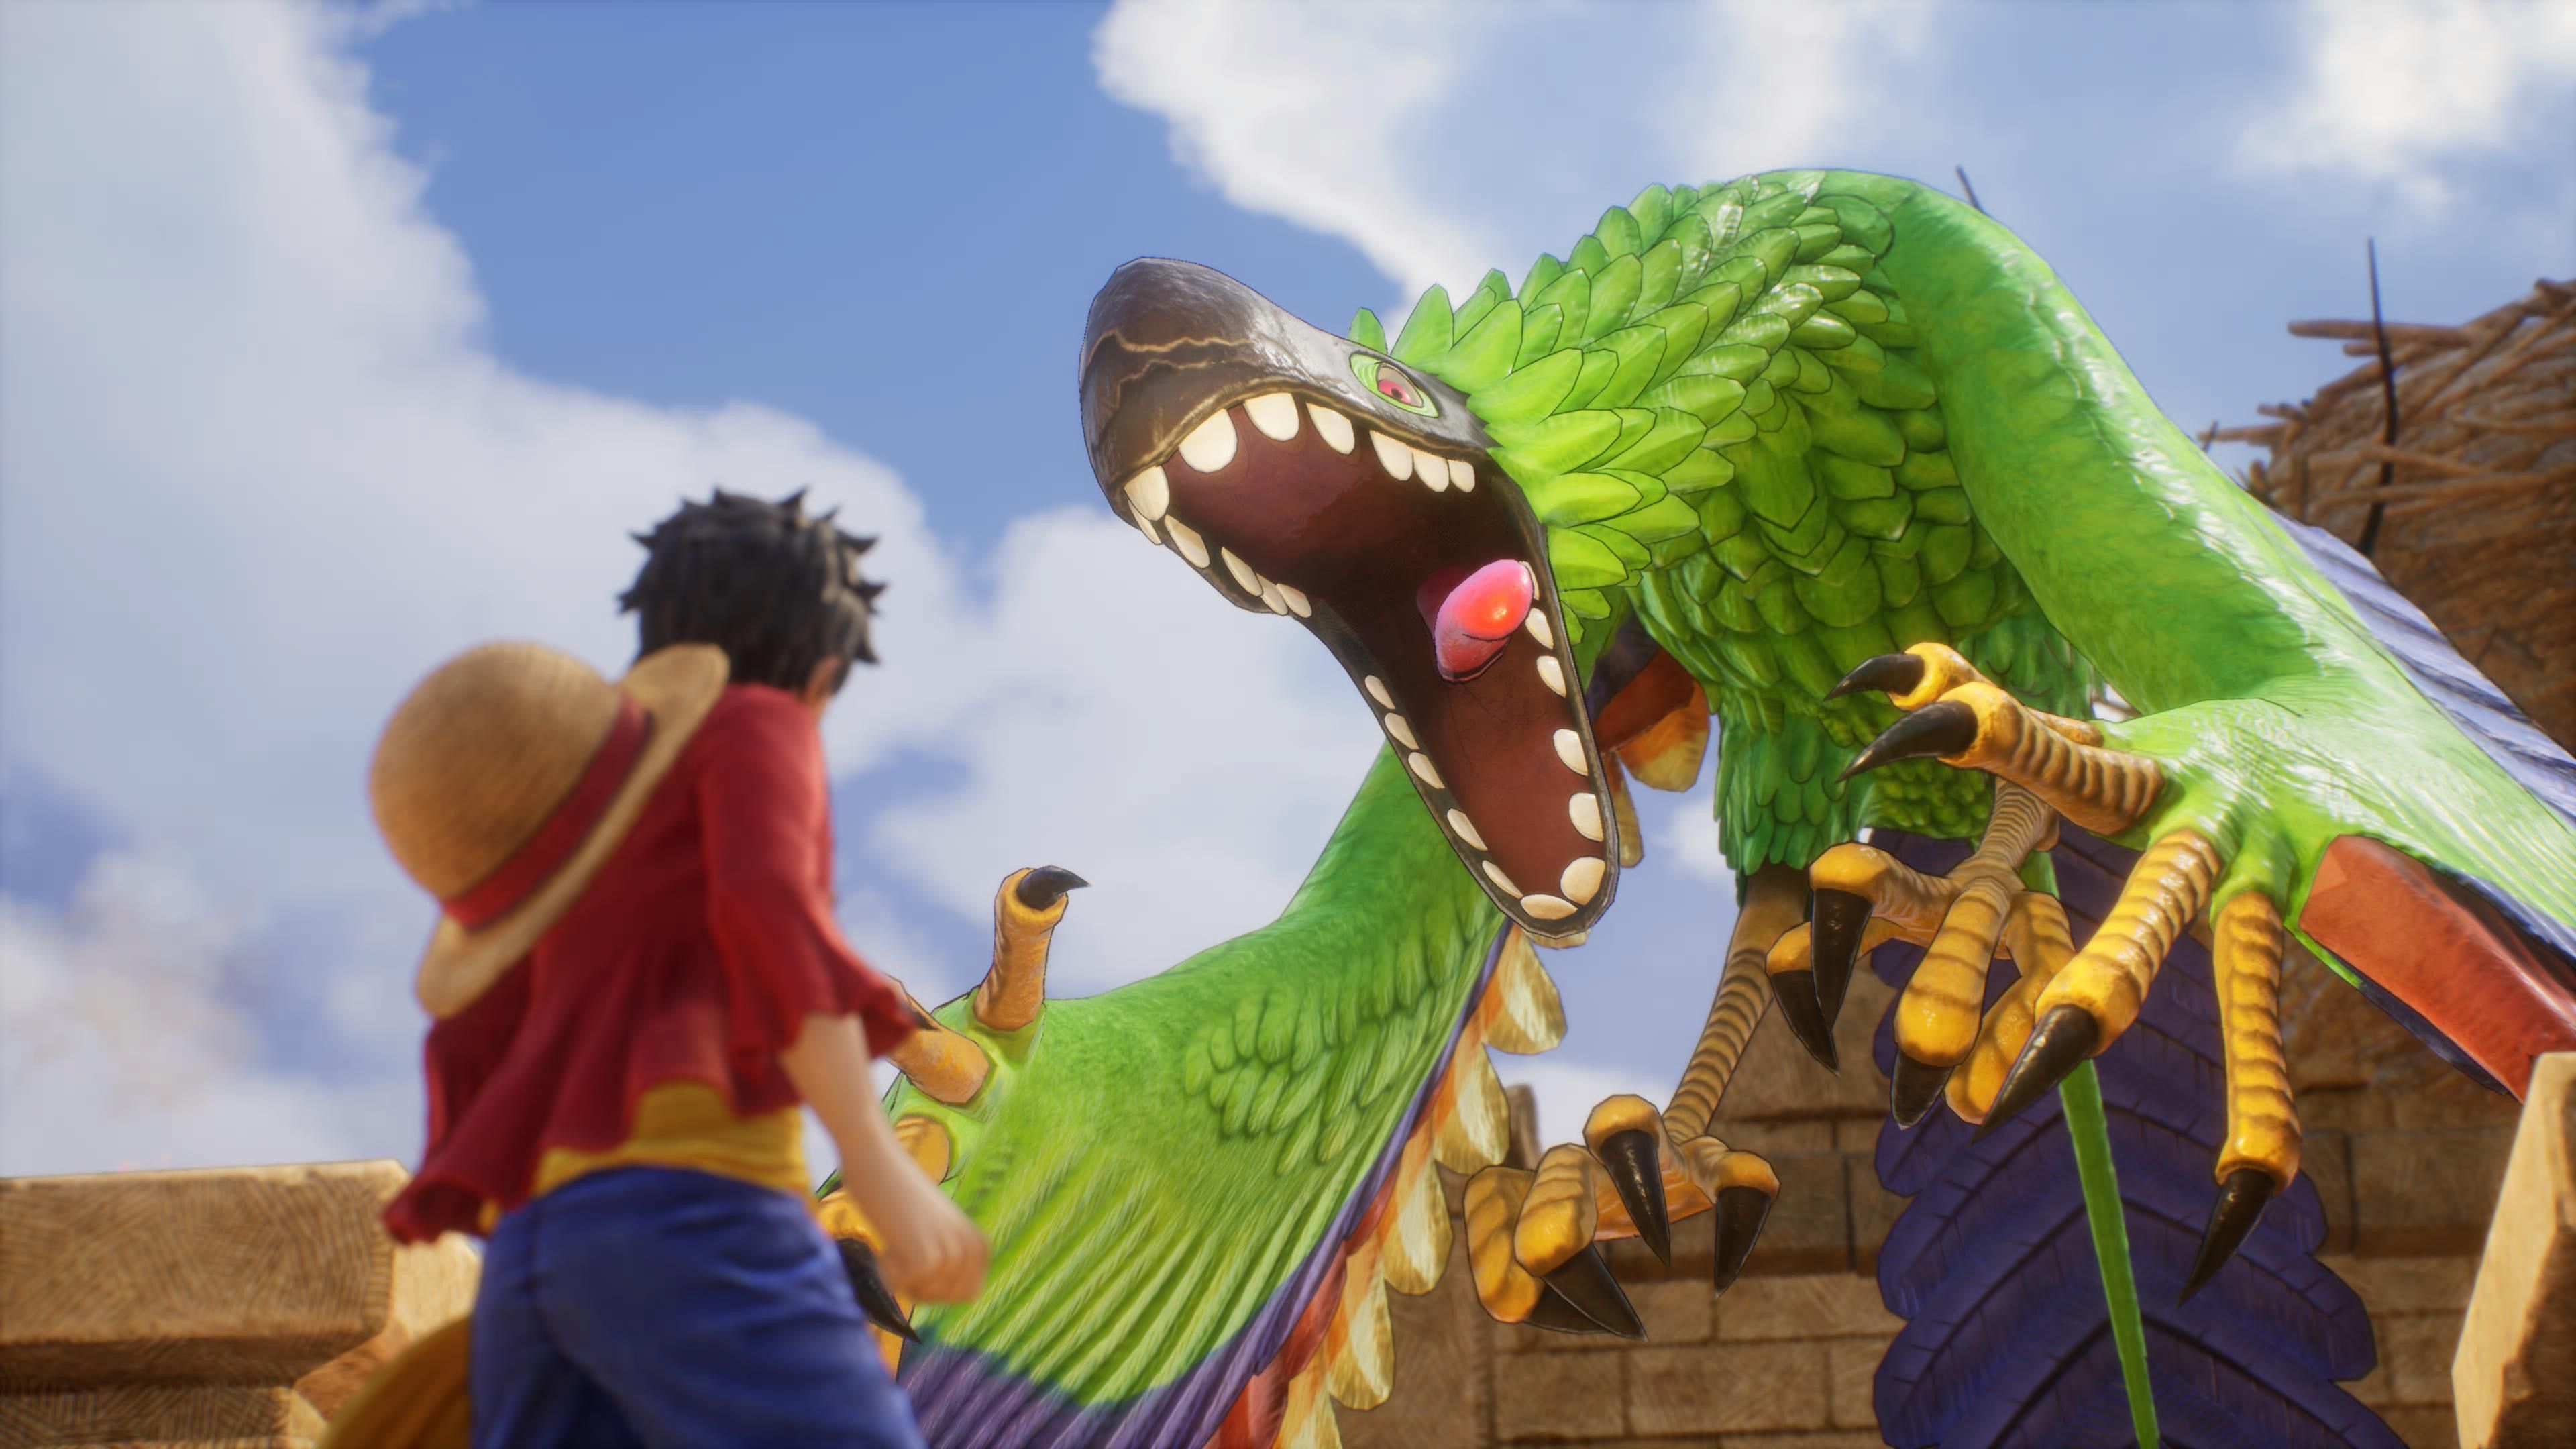 One Piece Odyssey Luffy stares down large green bird monster